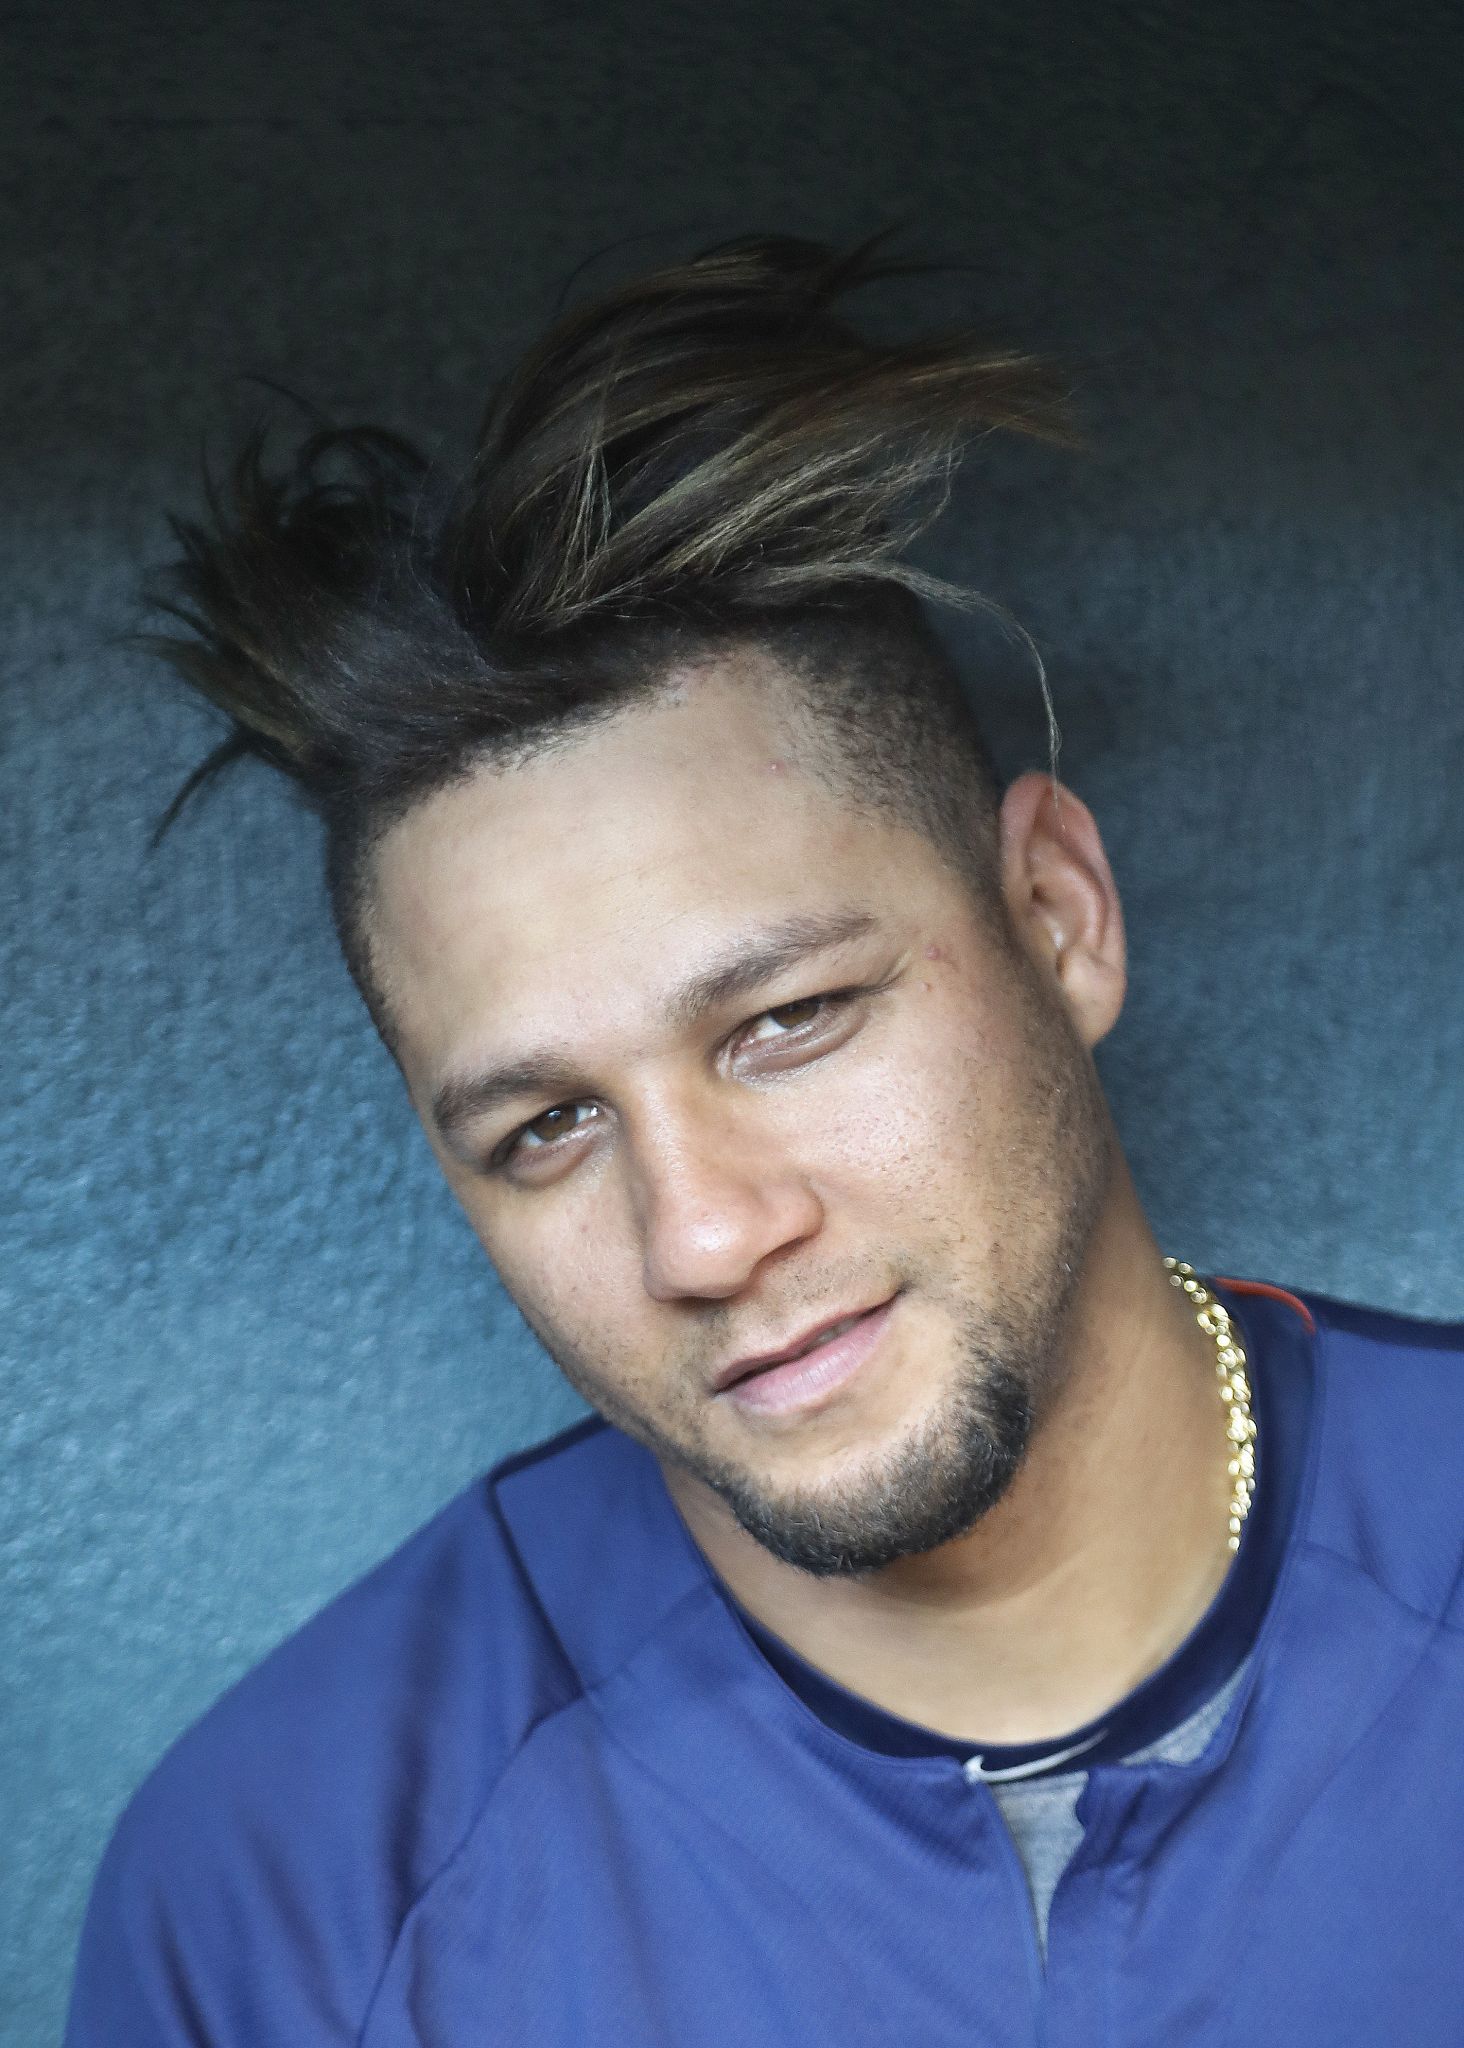 A cut above: The legend of the Astros' hair